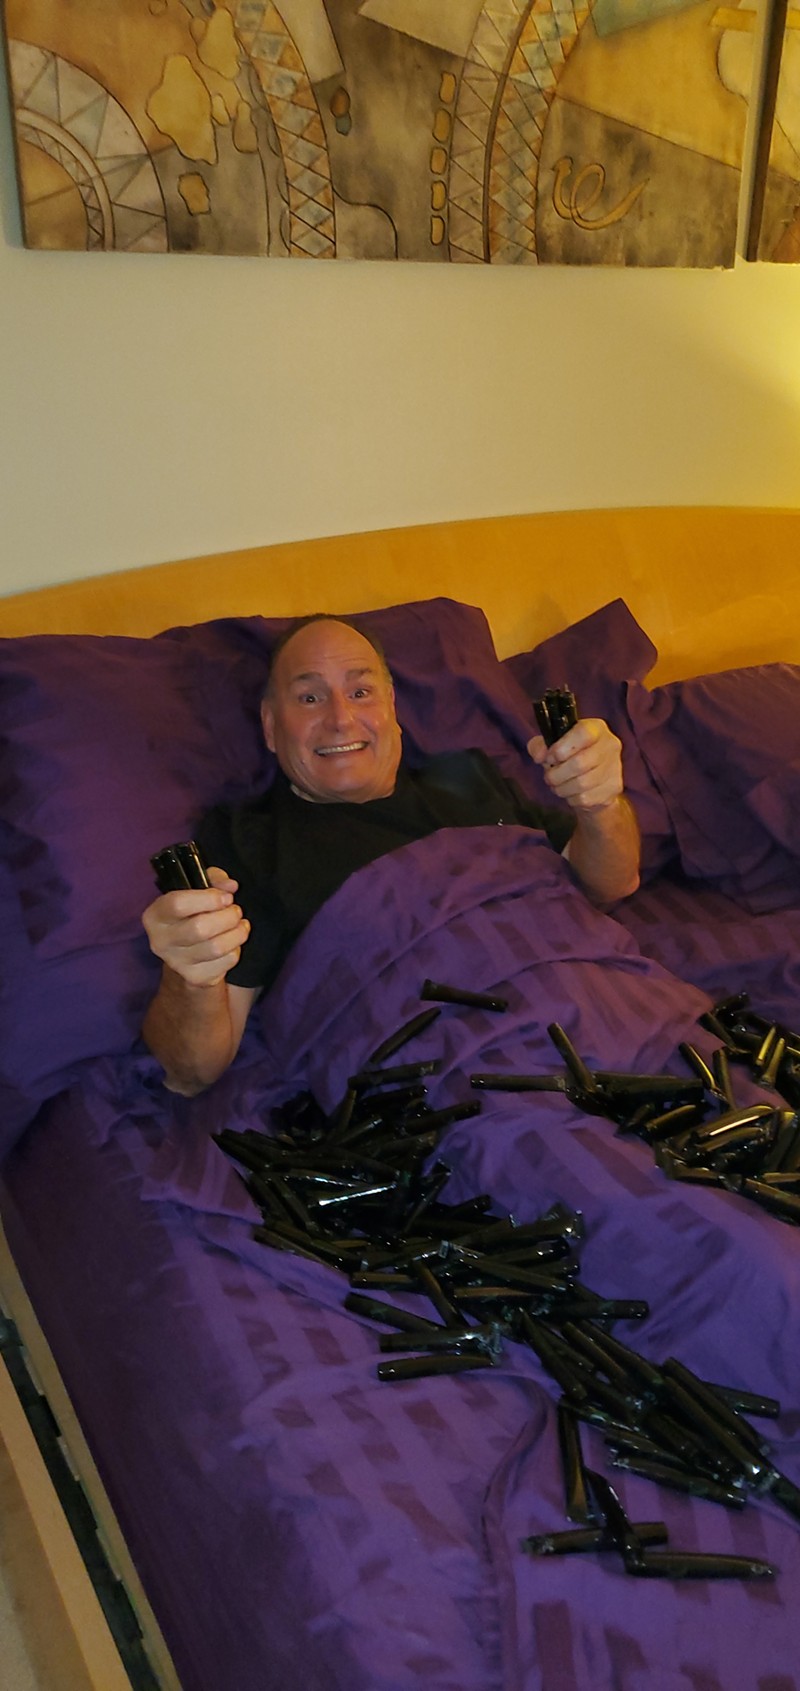 Joseph Verdone snuggling up with some of his OMGX lubricant.